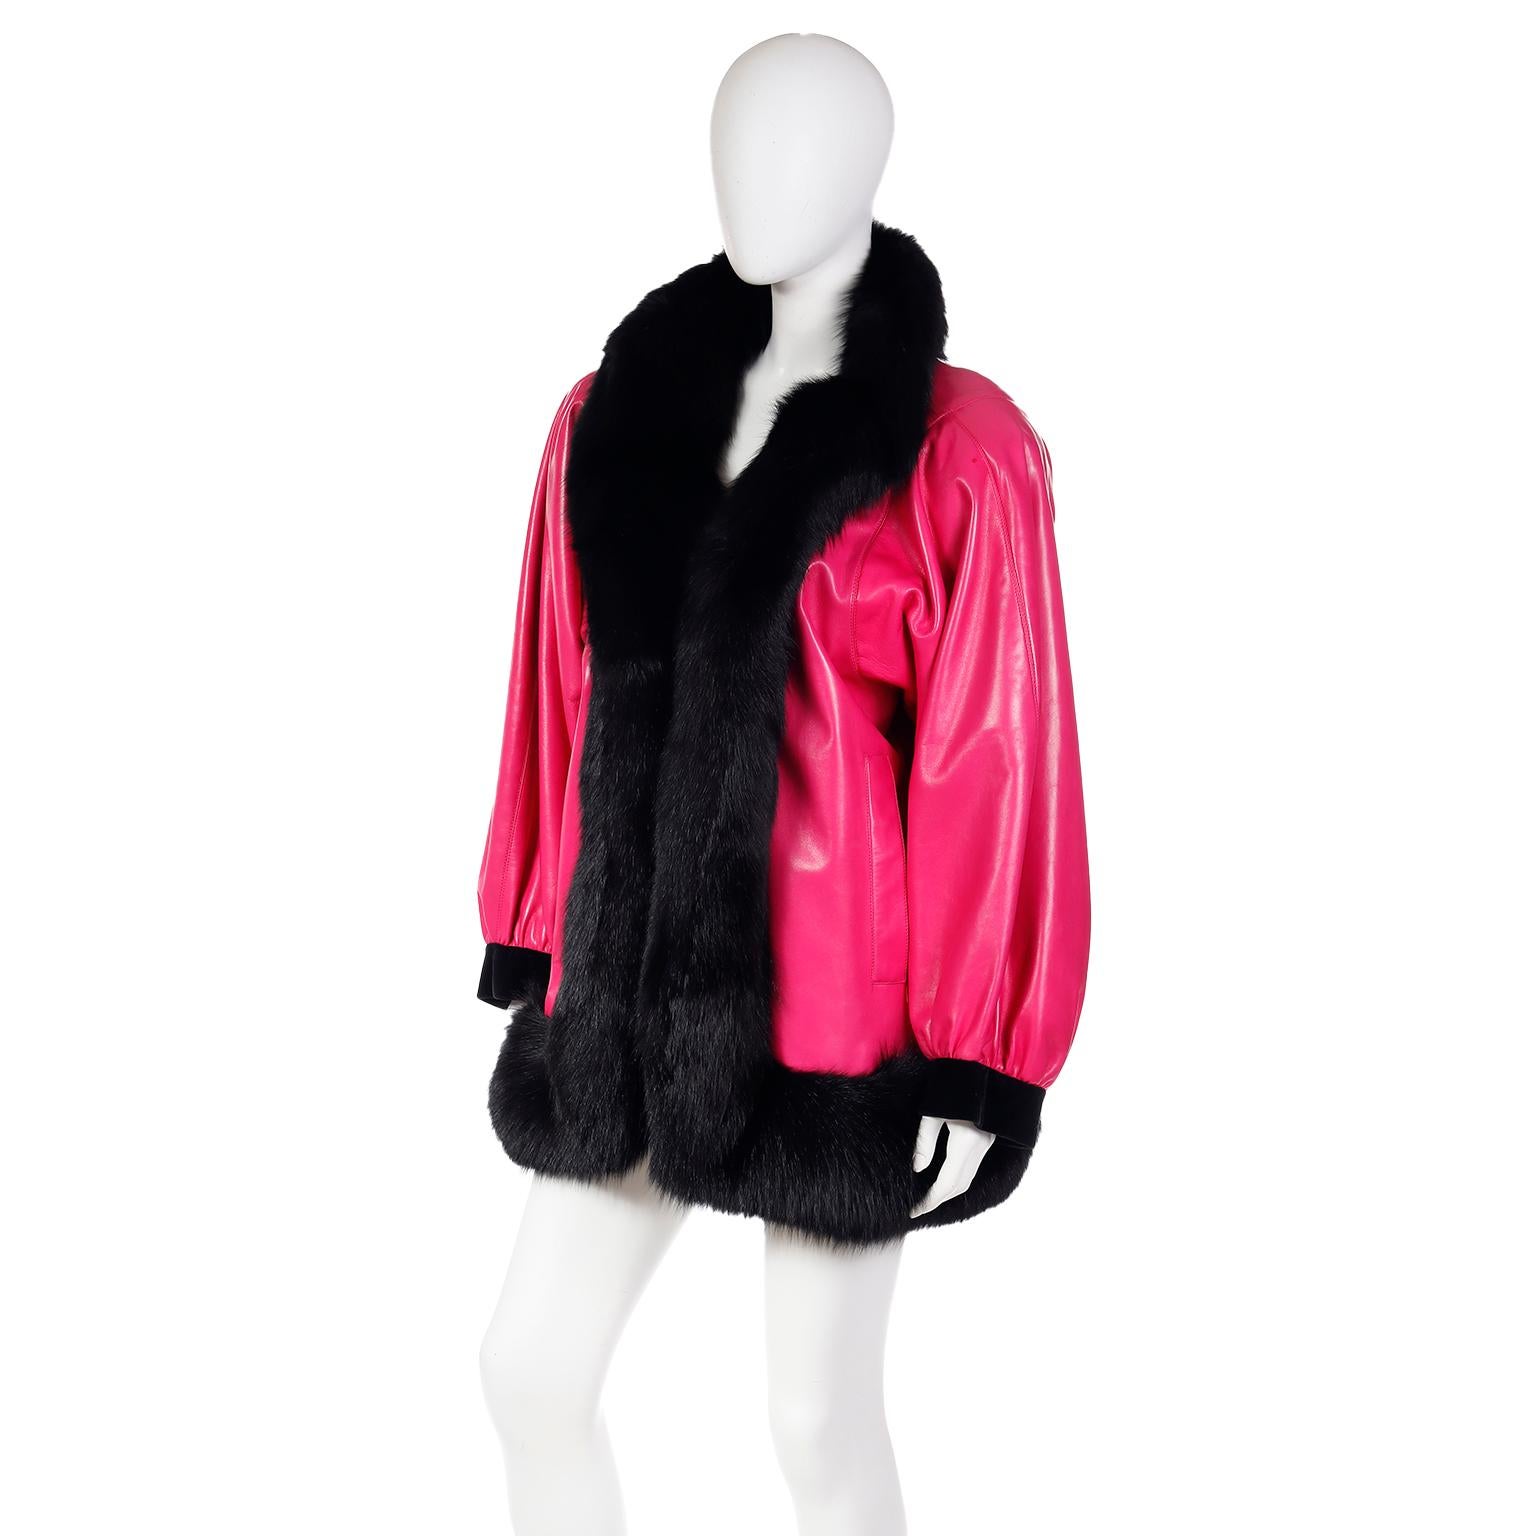 1987 Yves Saint Laurent Runway Haute Couture Pink Leather Jacket w Black Fur In Excellent Condition For Sale In Portland, OR